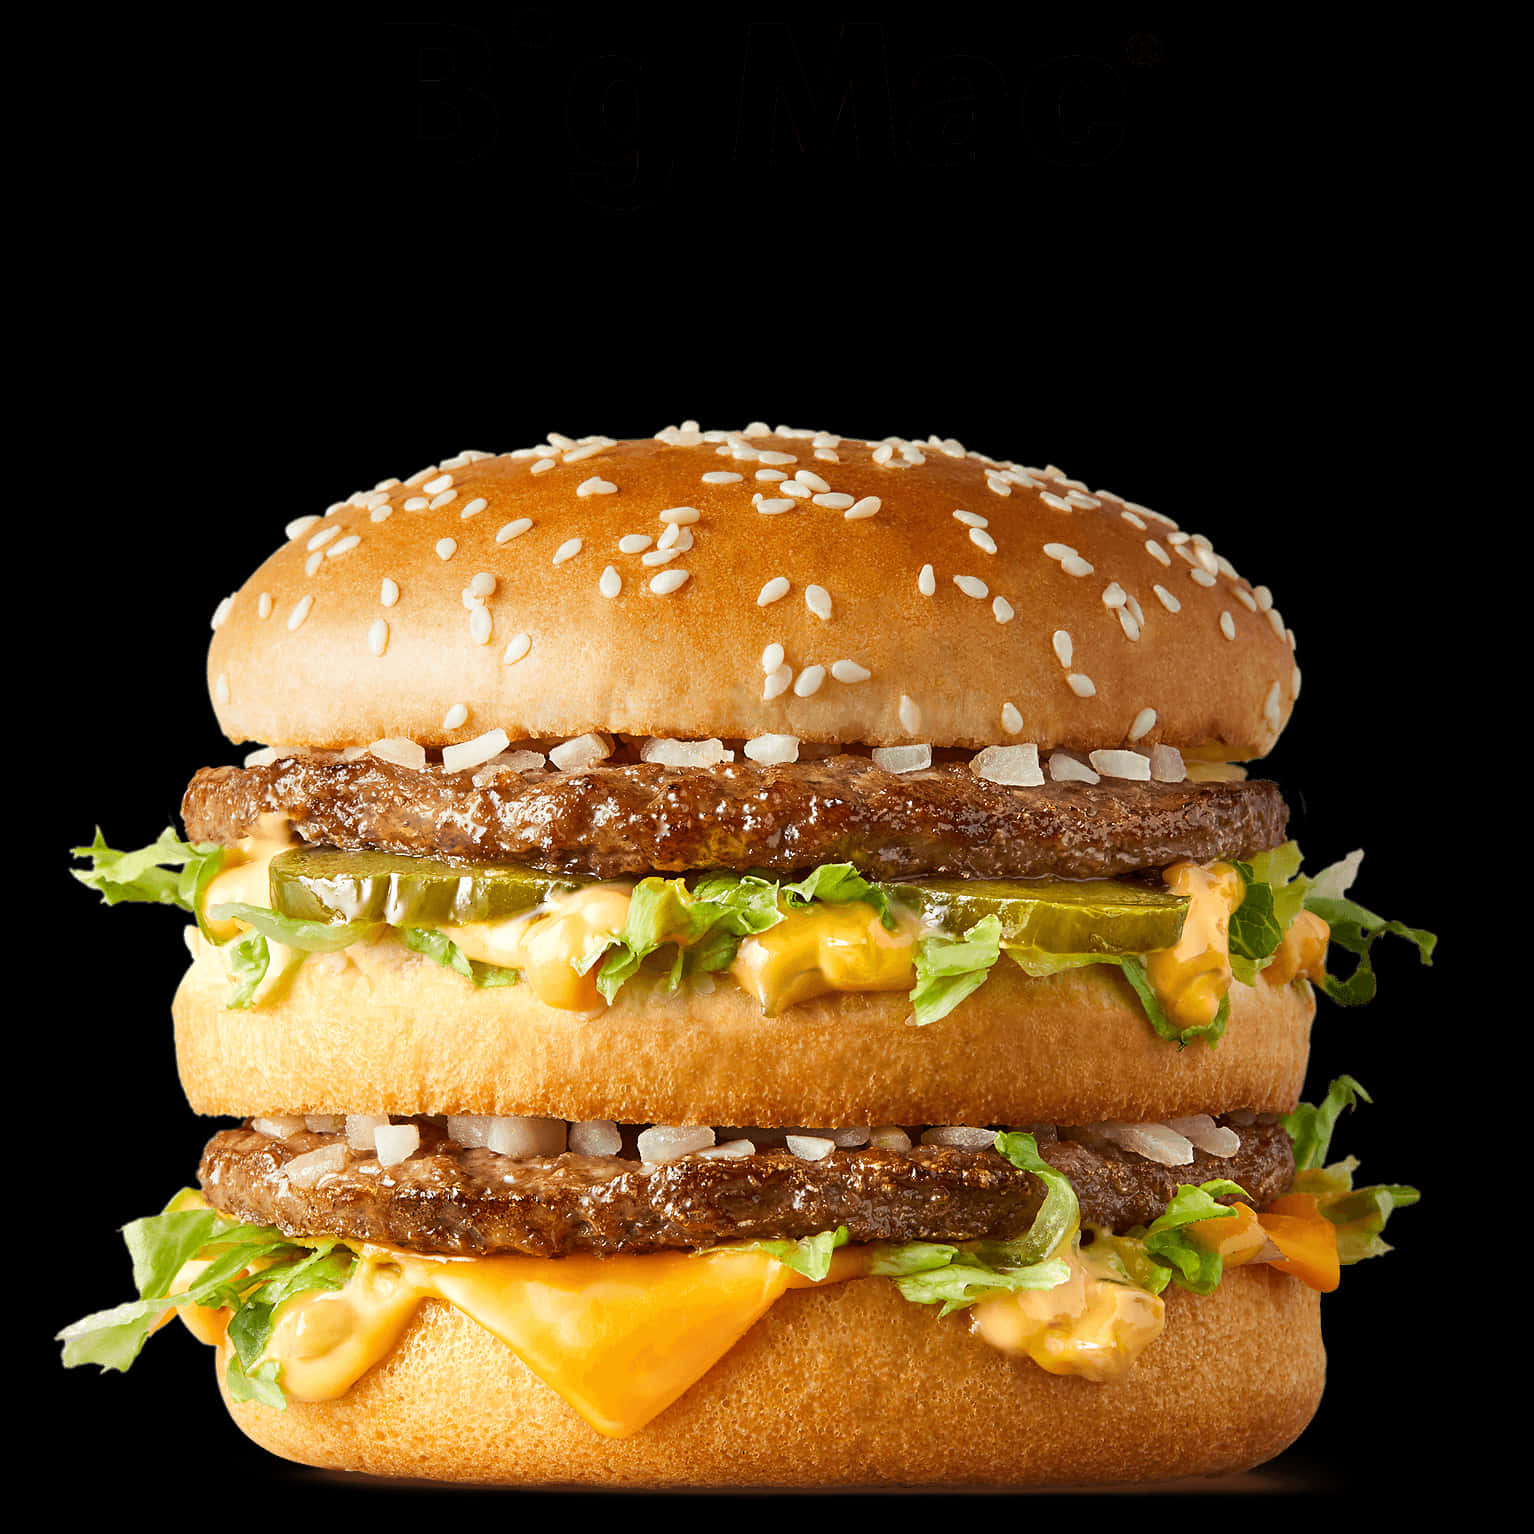 Delicious McDonalds food ready for you to enjoy.